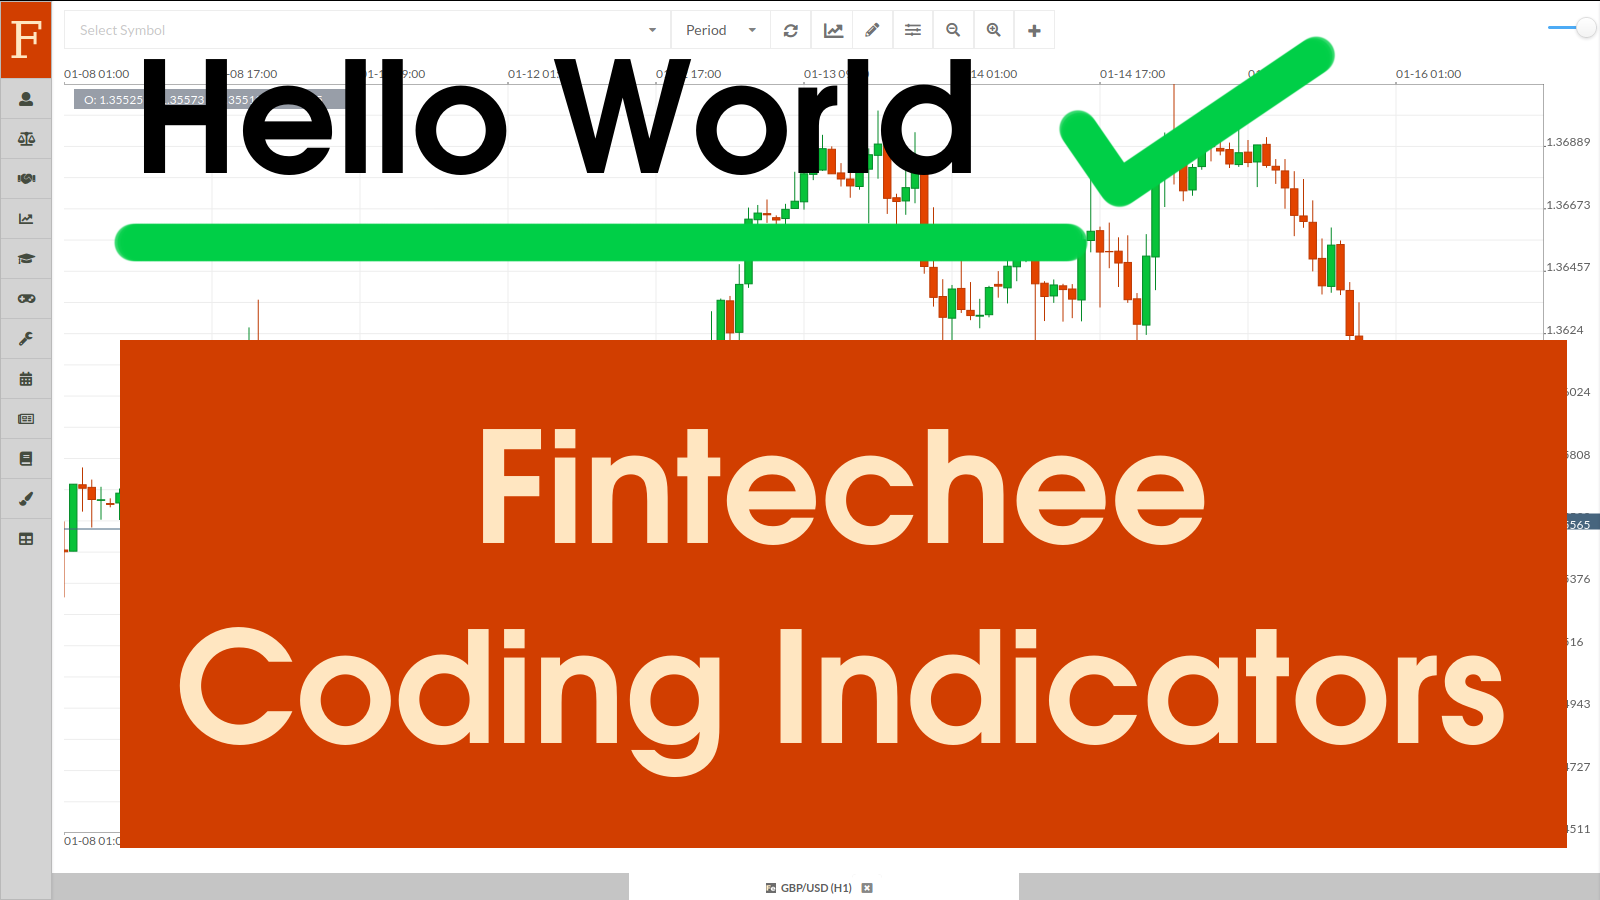 This tutorial video talks about how to code an indicator via Fintechee WEB Trader